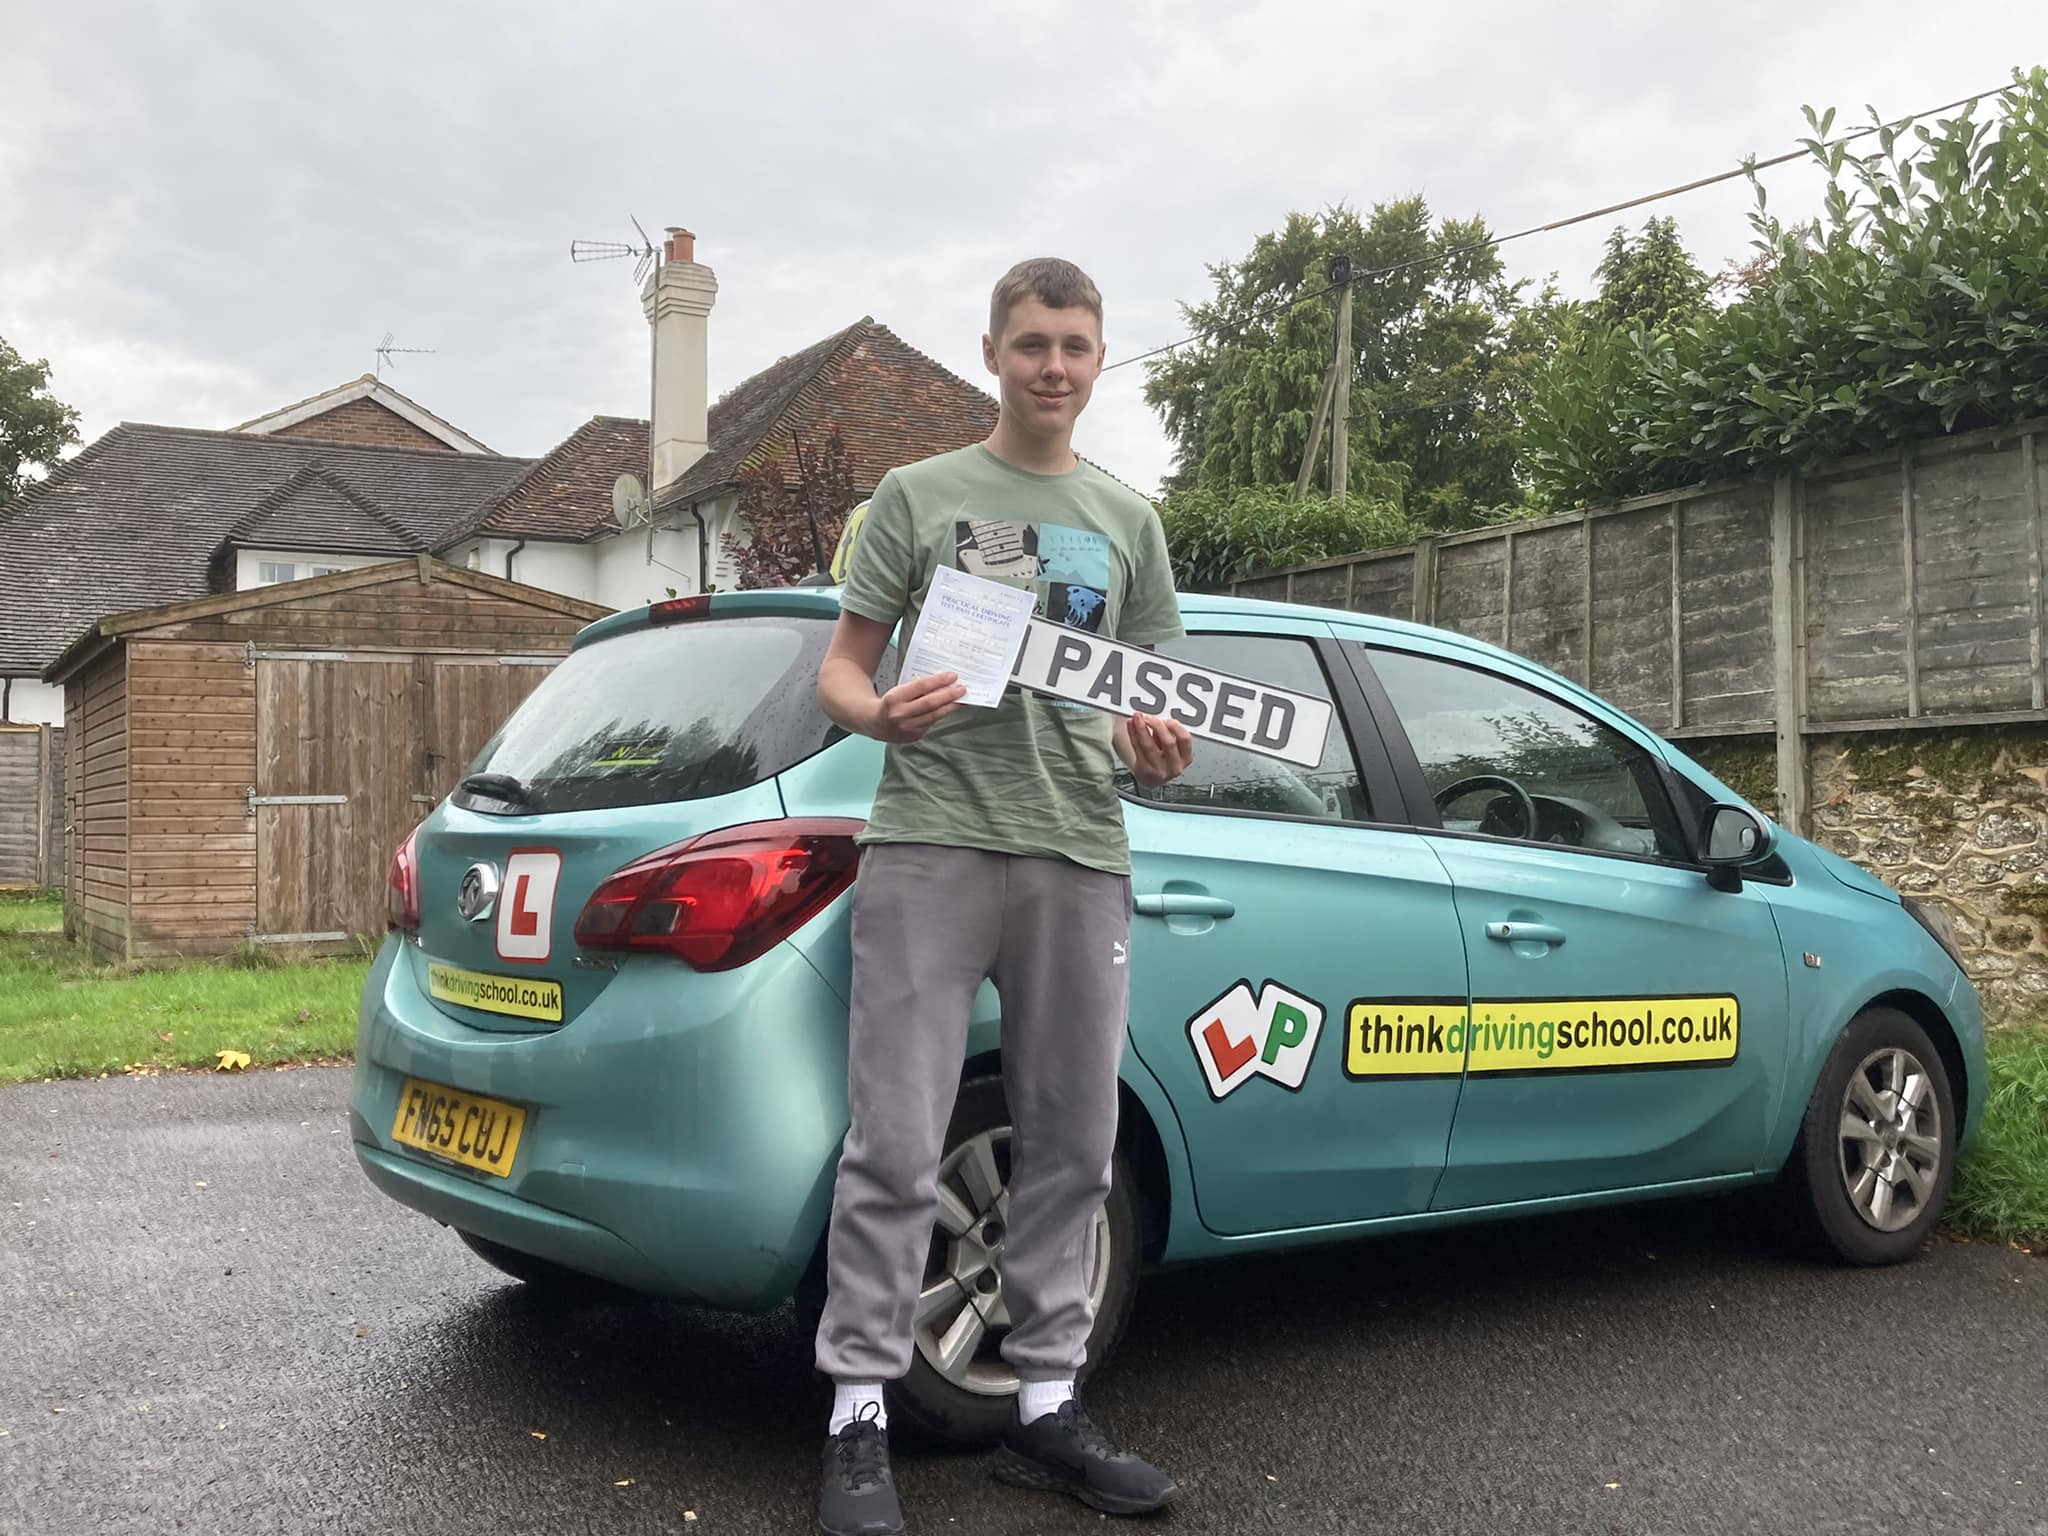 Passed with think driving school September 2022 and left this 5 star review